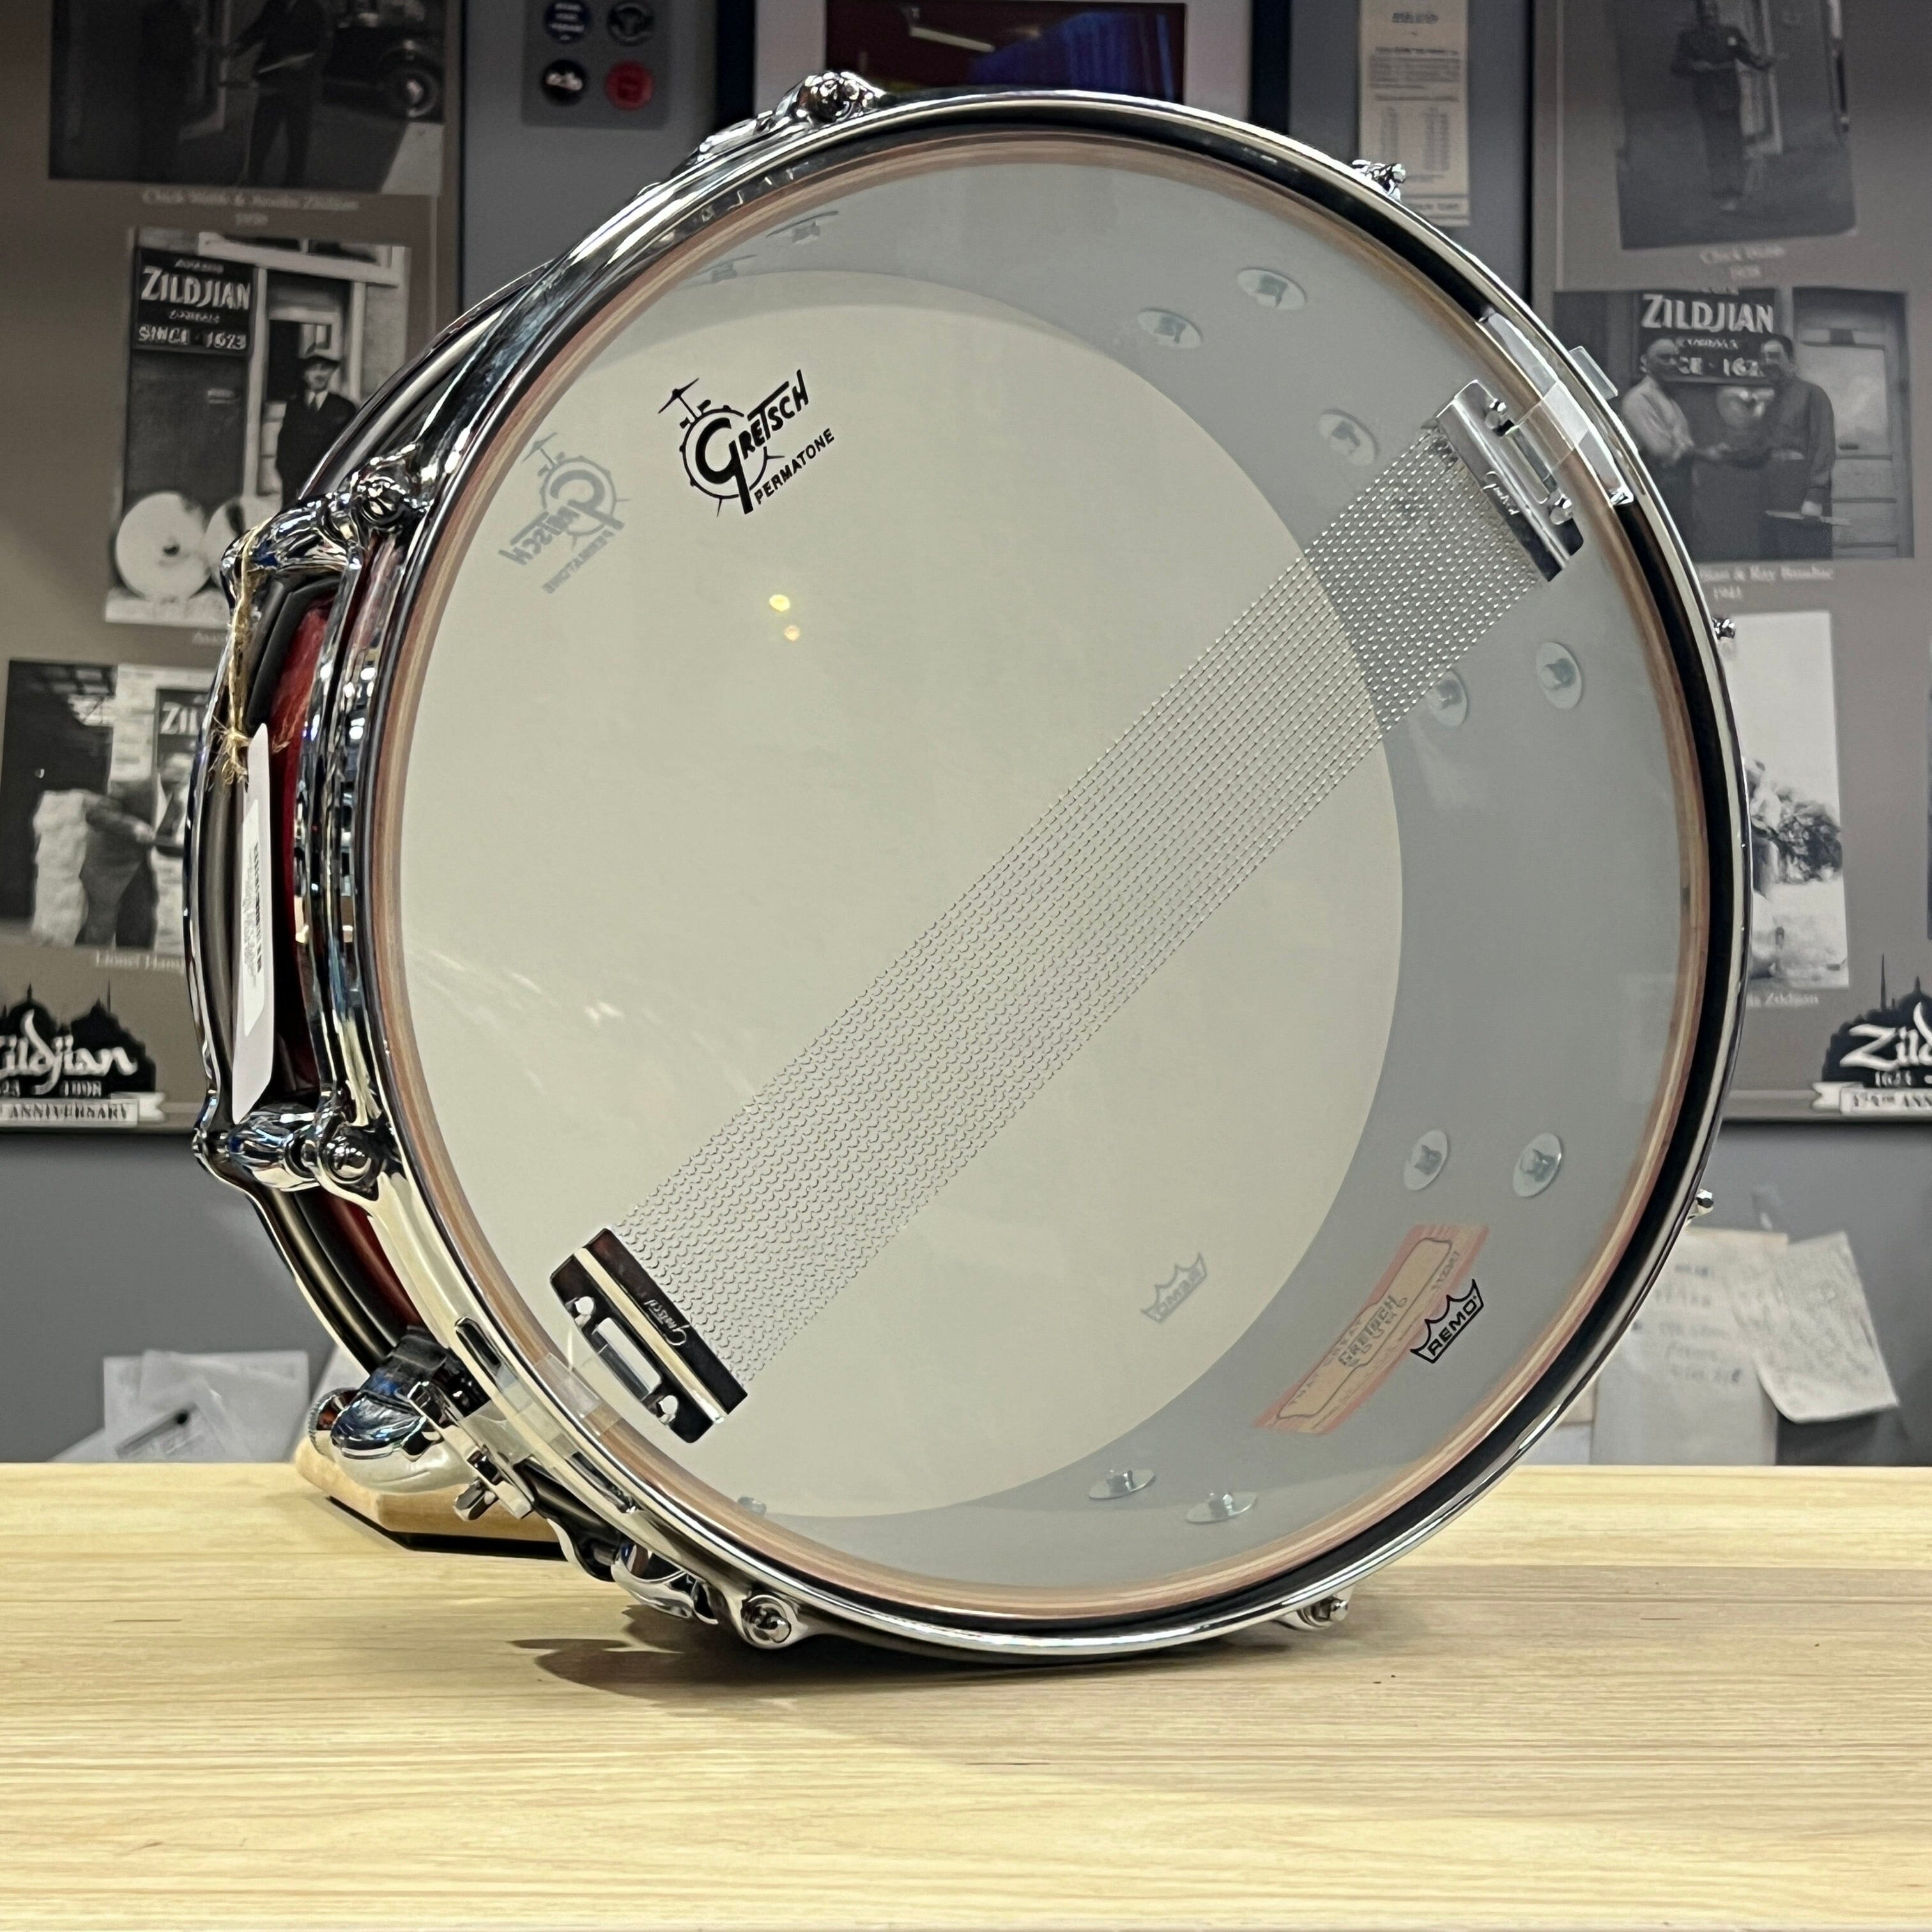 GRETSCH 5.5x14 Rosewood Twilight Gloss Lacquer (GRGL5514S8CL) NEW SNARE DRUMS Gretsch 